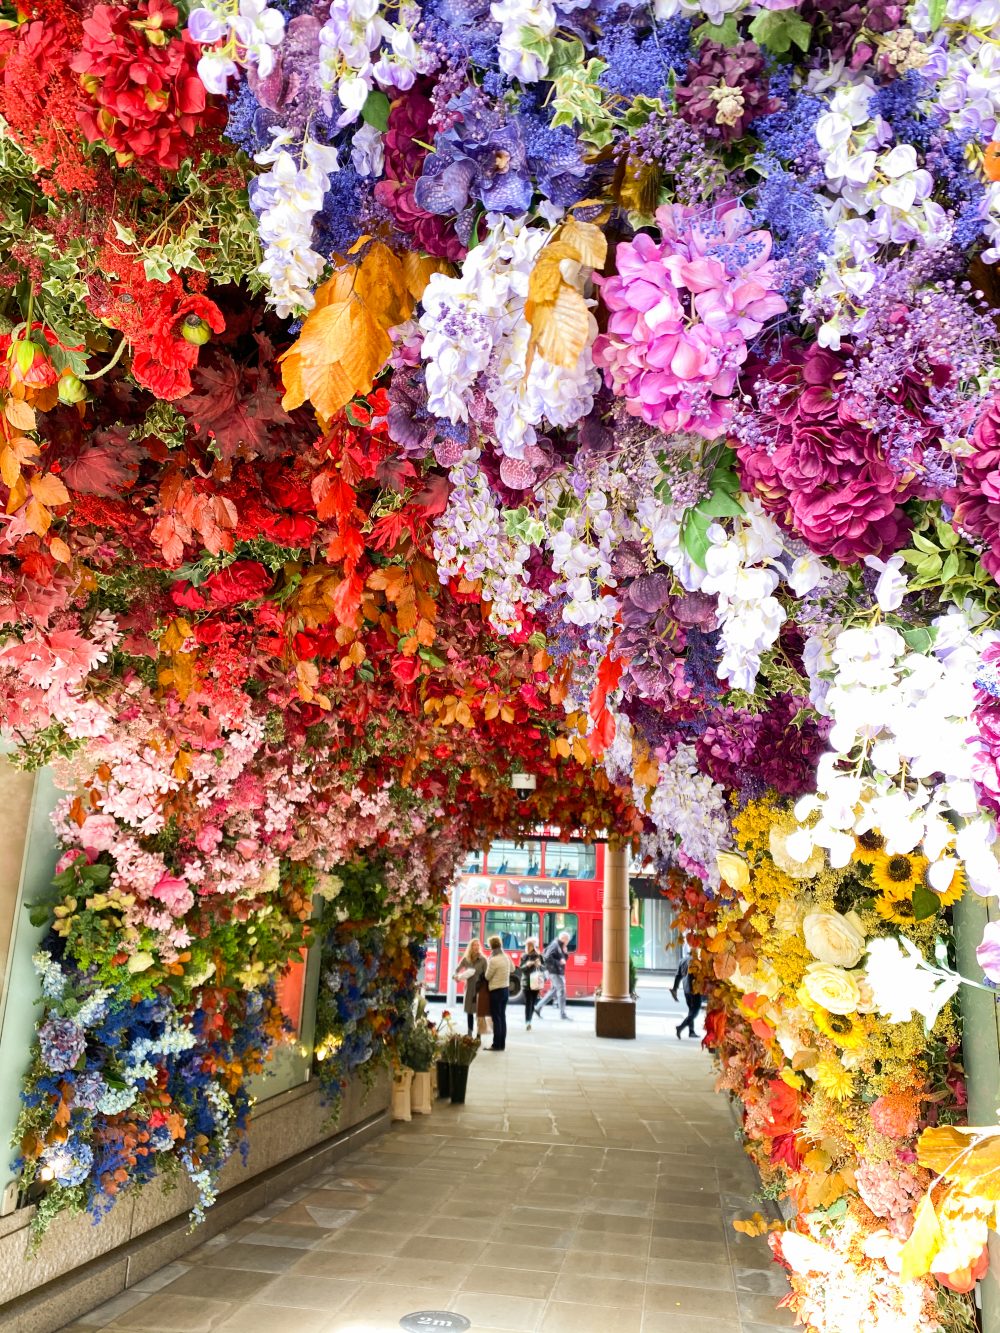 Colourful Chelsea in Bloom